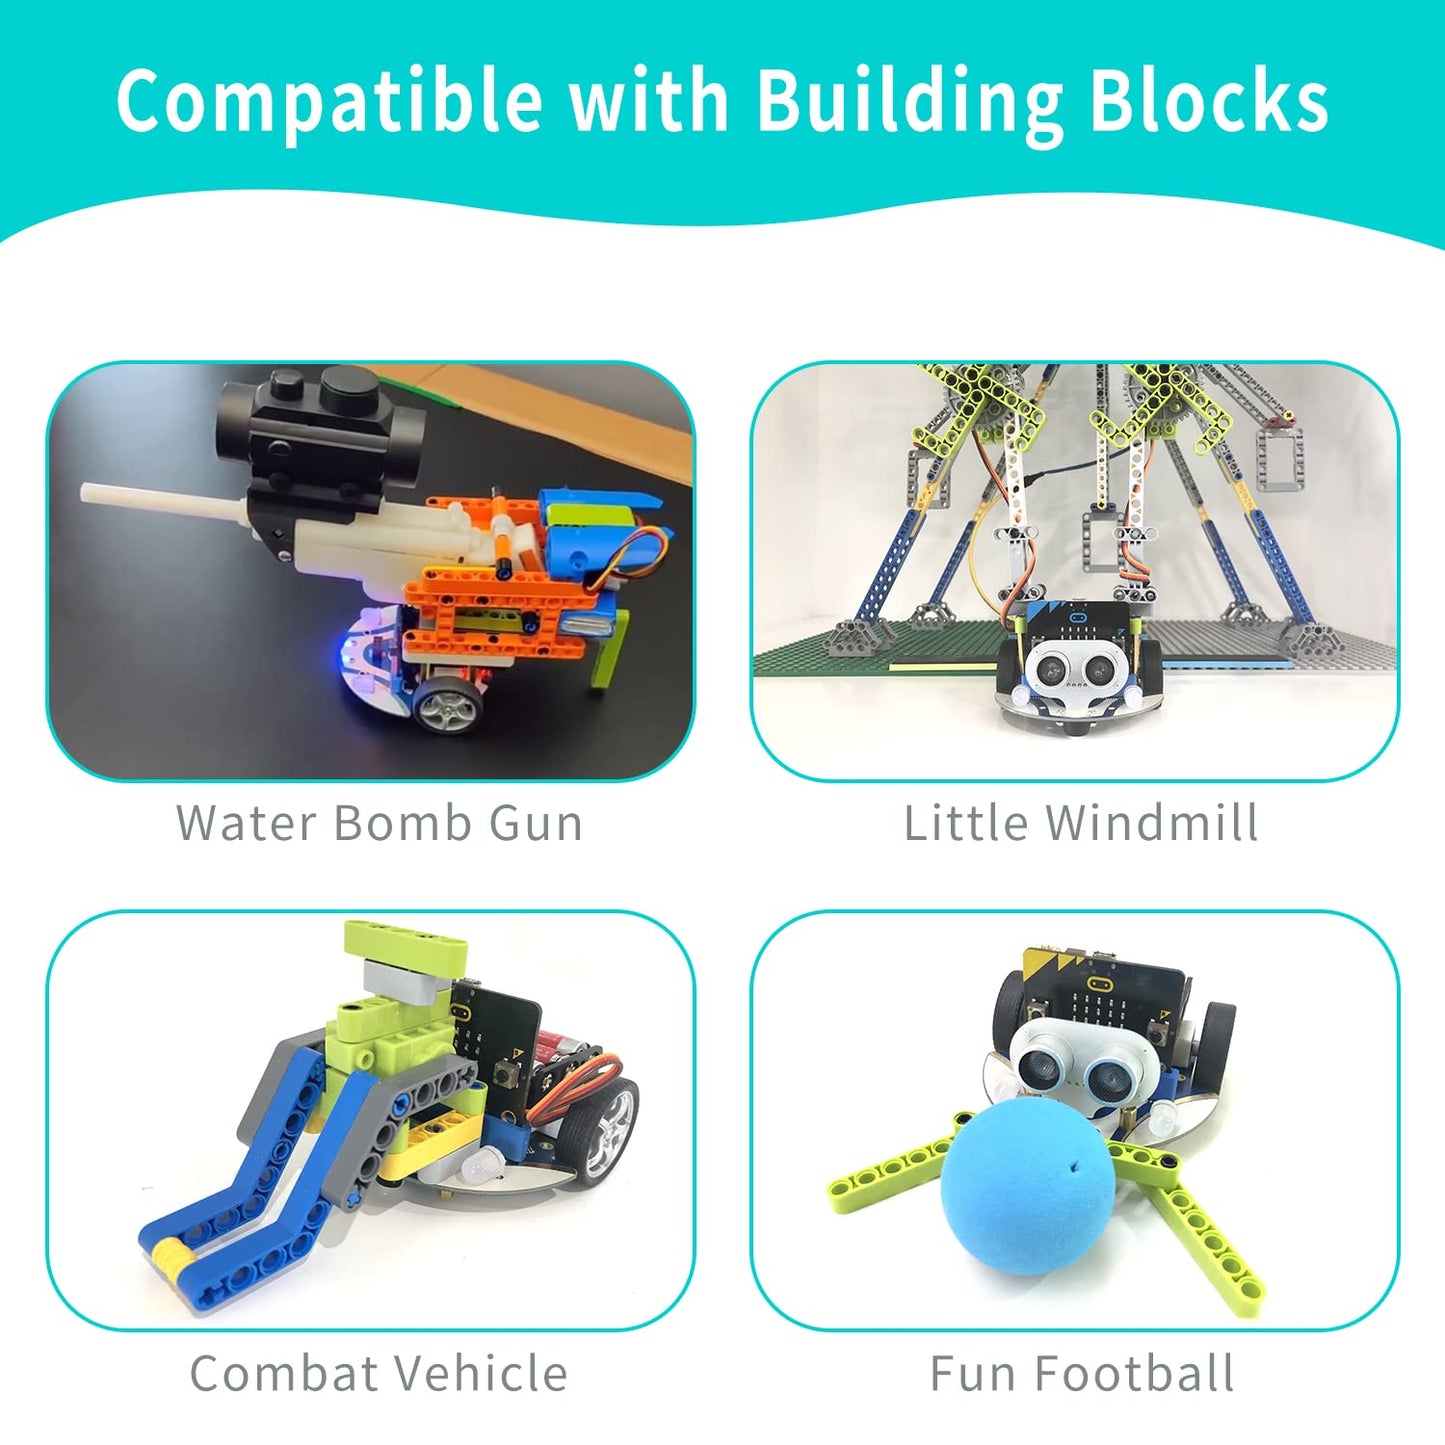 ELECFREAKS microbit Mini Cutebot Kit Compatible with BBC Micro:bit V2 and V1, DIY Programmable Robot Car Kit, STEM Educational Project, Graphical Makecode Coding Car with Tutorial (Without Micro:bit)